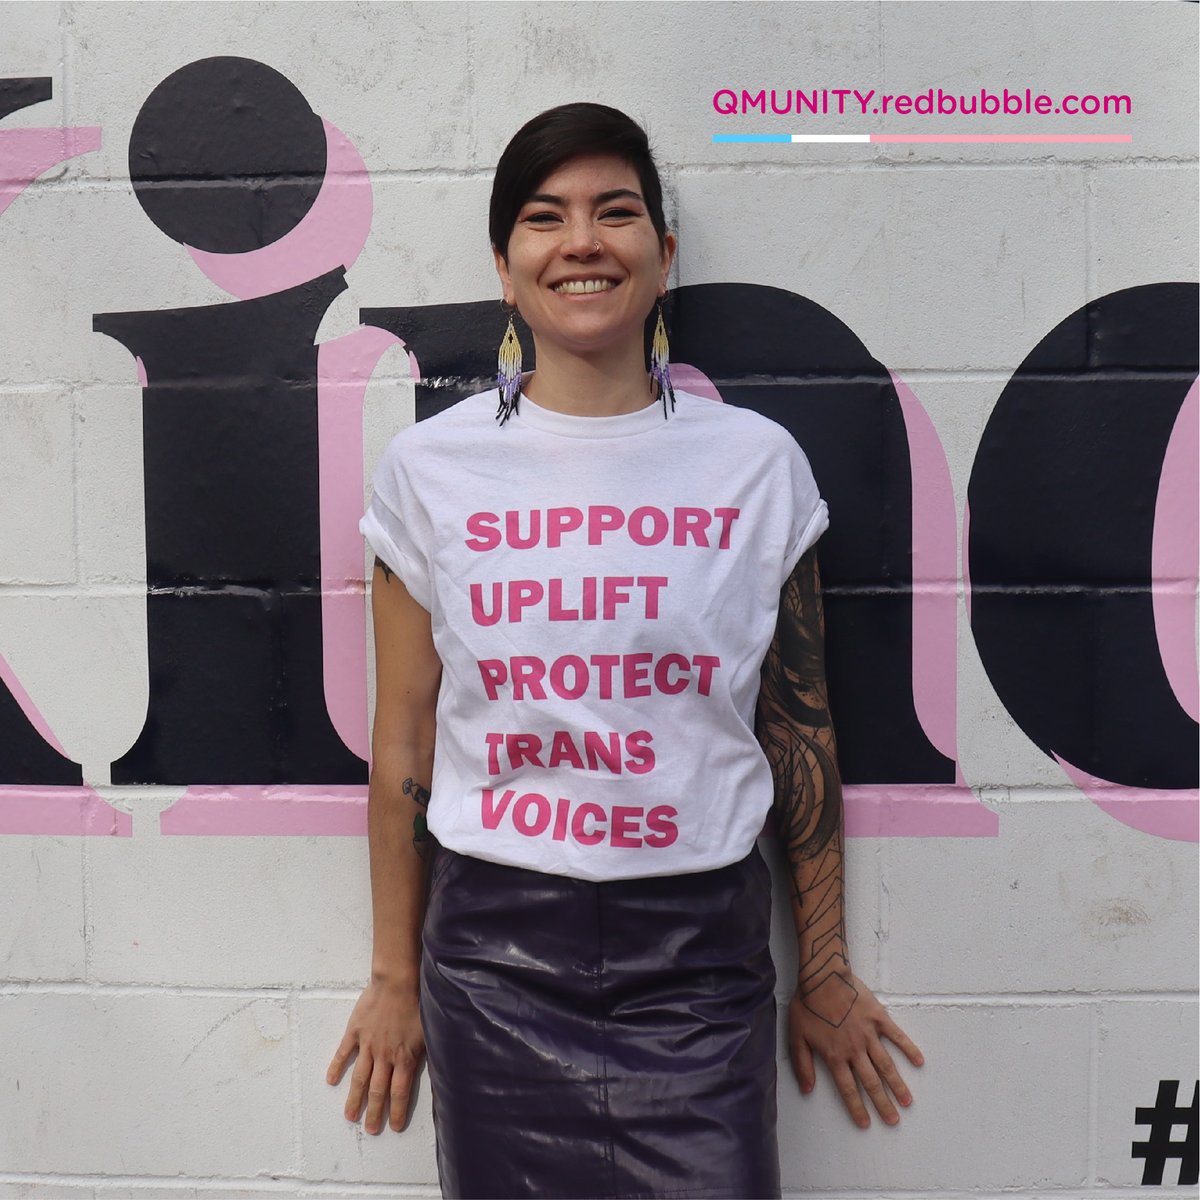 We're excited to launch our online shop with our first collection featuring items in support of #transdayofvisibility 🏳️‍⚧️ coming up March 31st. 100% of profits go directly to providing 2SLGBTQIA+ folks with programs and services in BC. Visit our shop today QMUNITY.redbubble.com